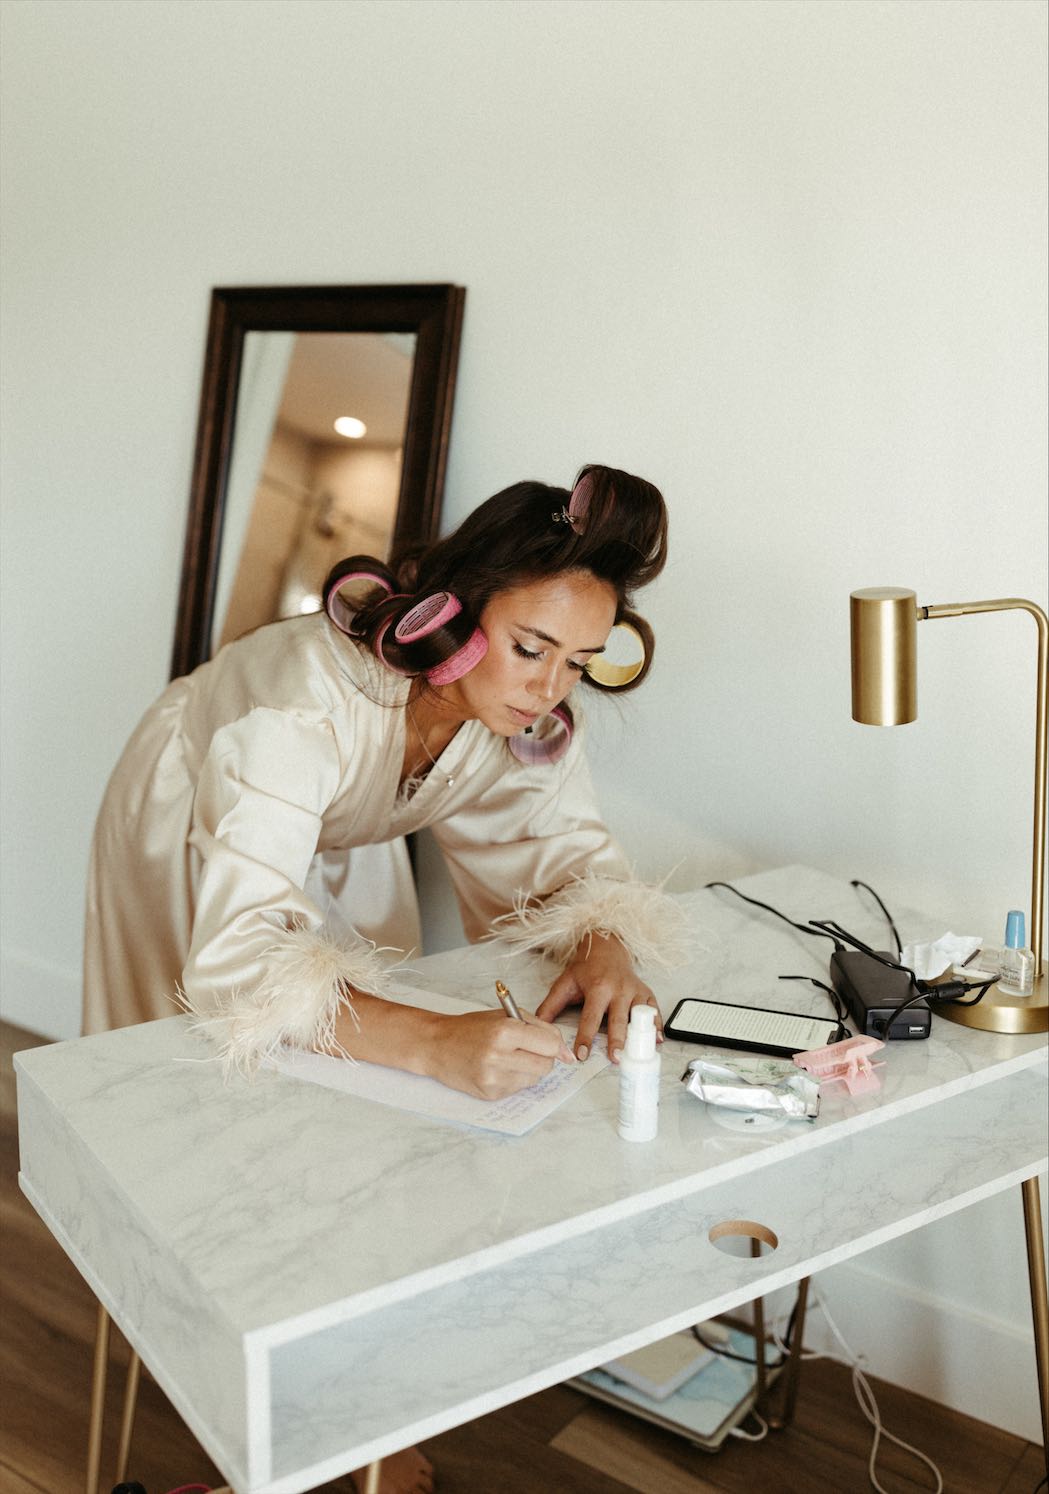 Bride writing a letter to her future husband on her wedding day